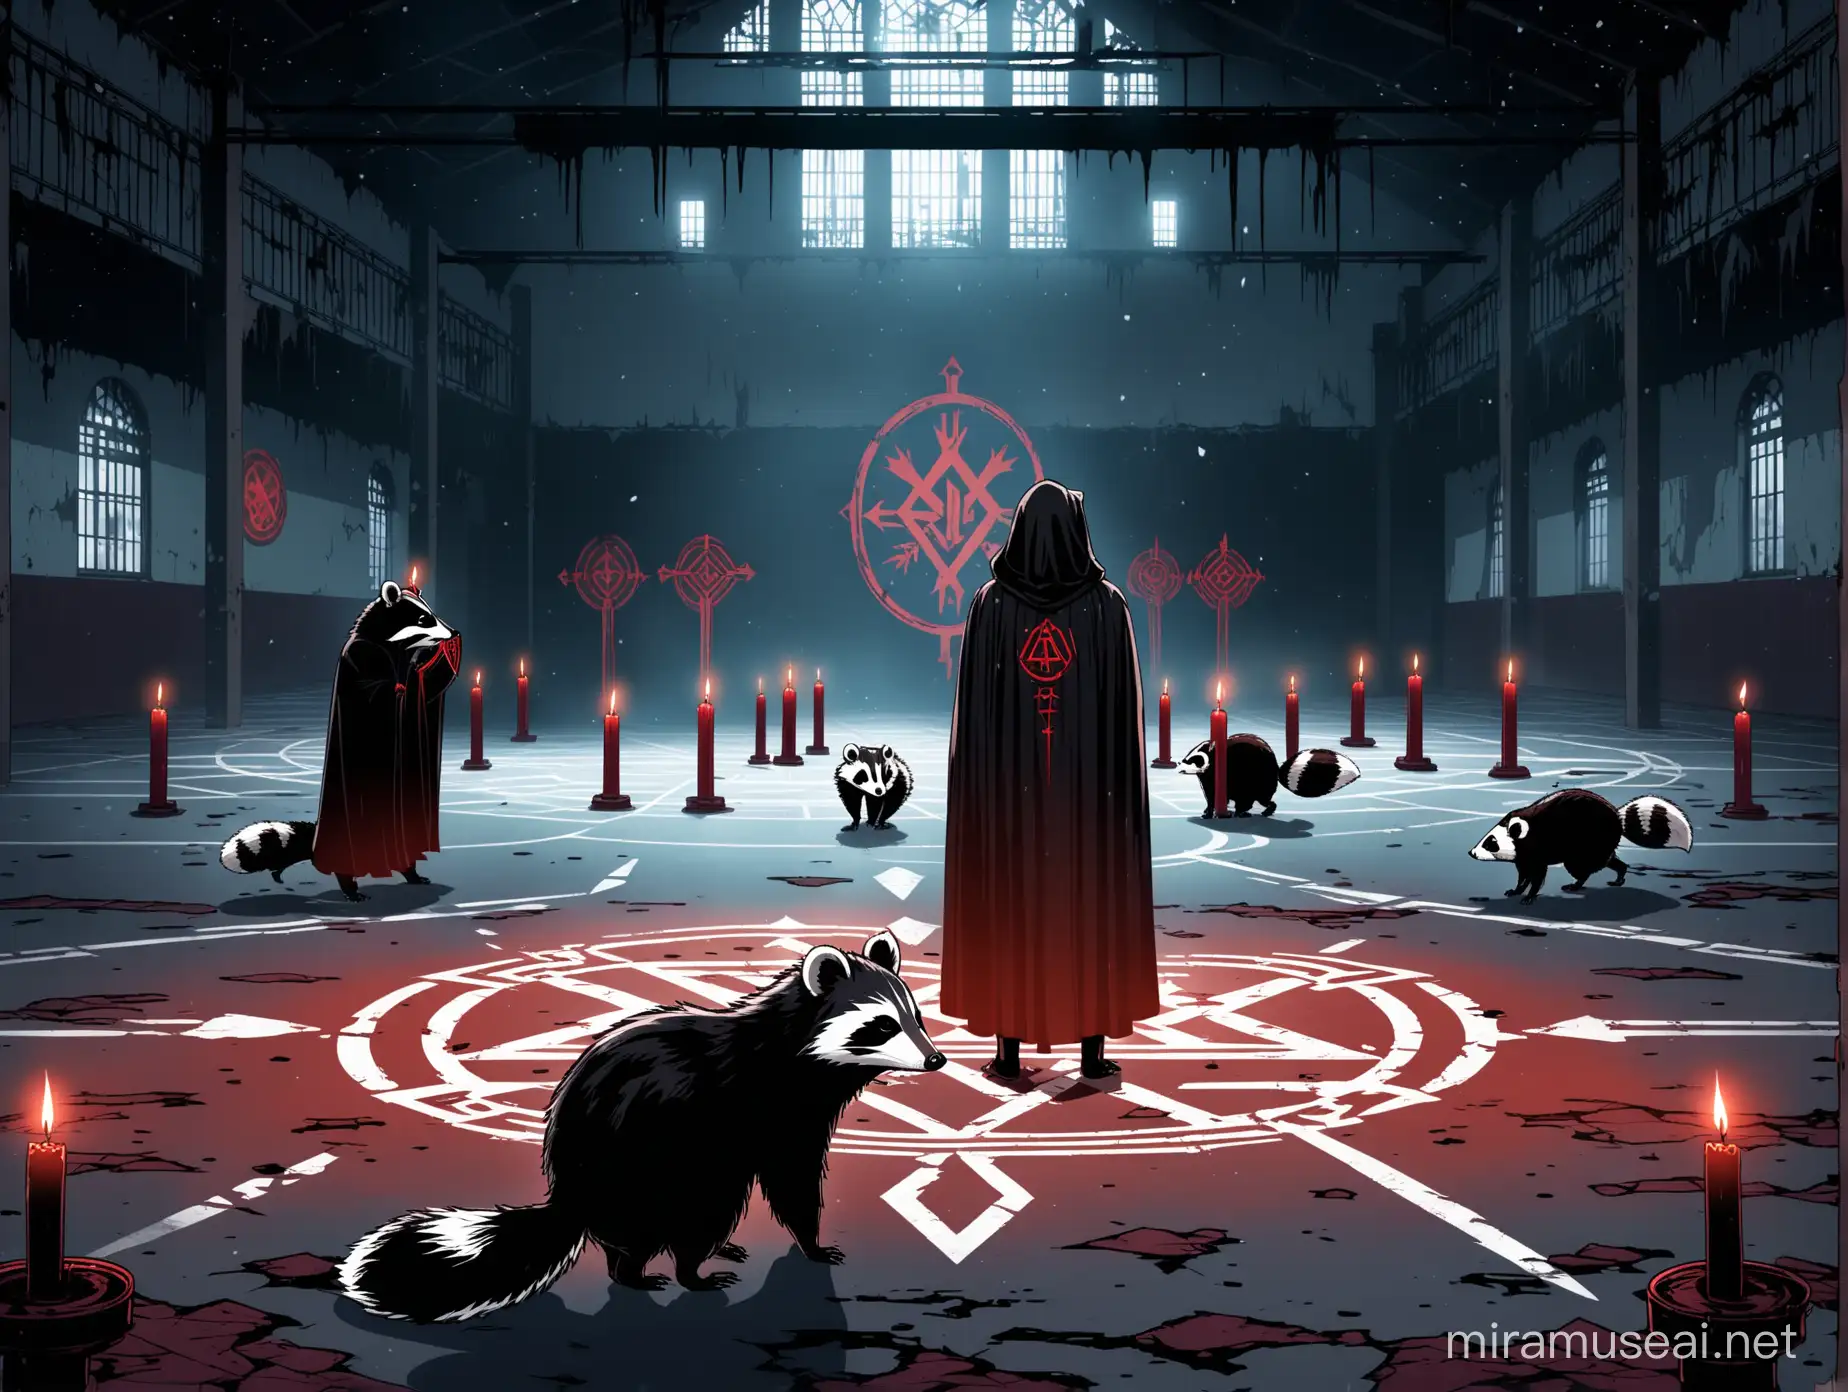 a raccoon and opossum and a skunk wearing cloaks are summoning the dark lord in an abandoned high school gym, there are black candles all over the gym, there is an alter in the center with a sacrifice on it, there is a large round runic sigil on the ground in red, spirits are visible in the background